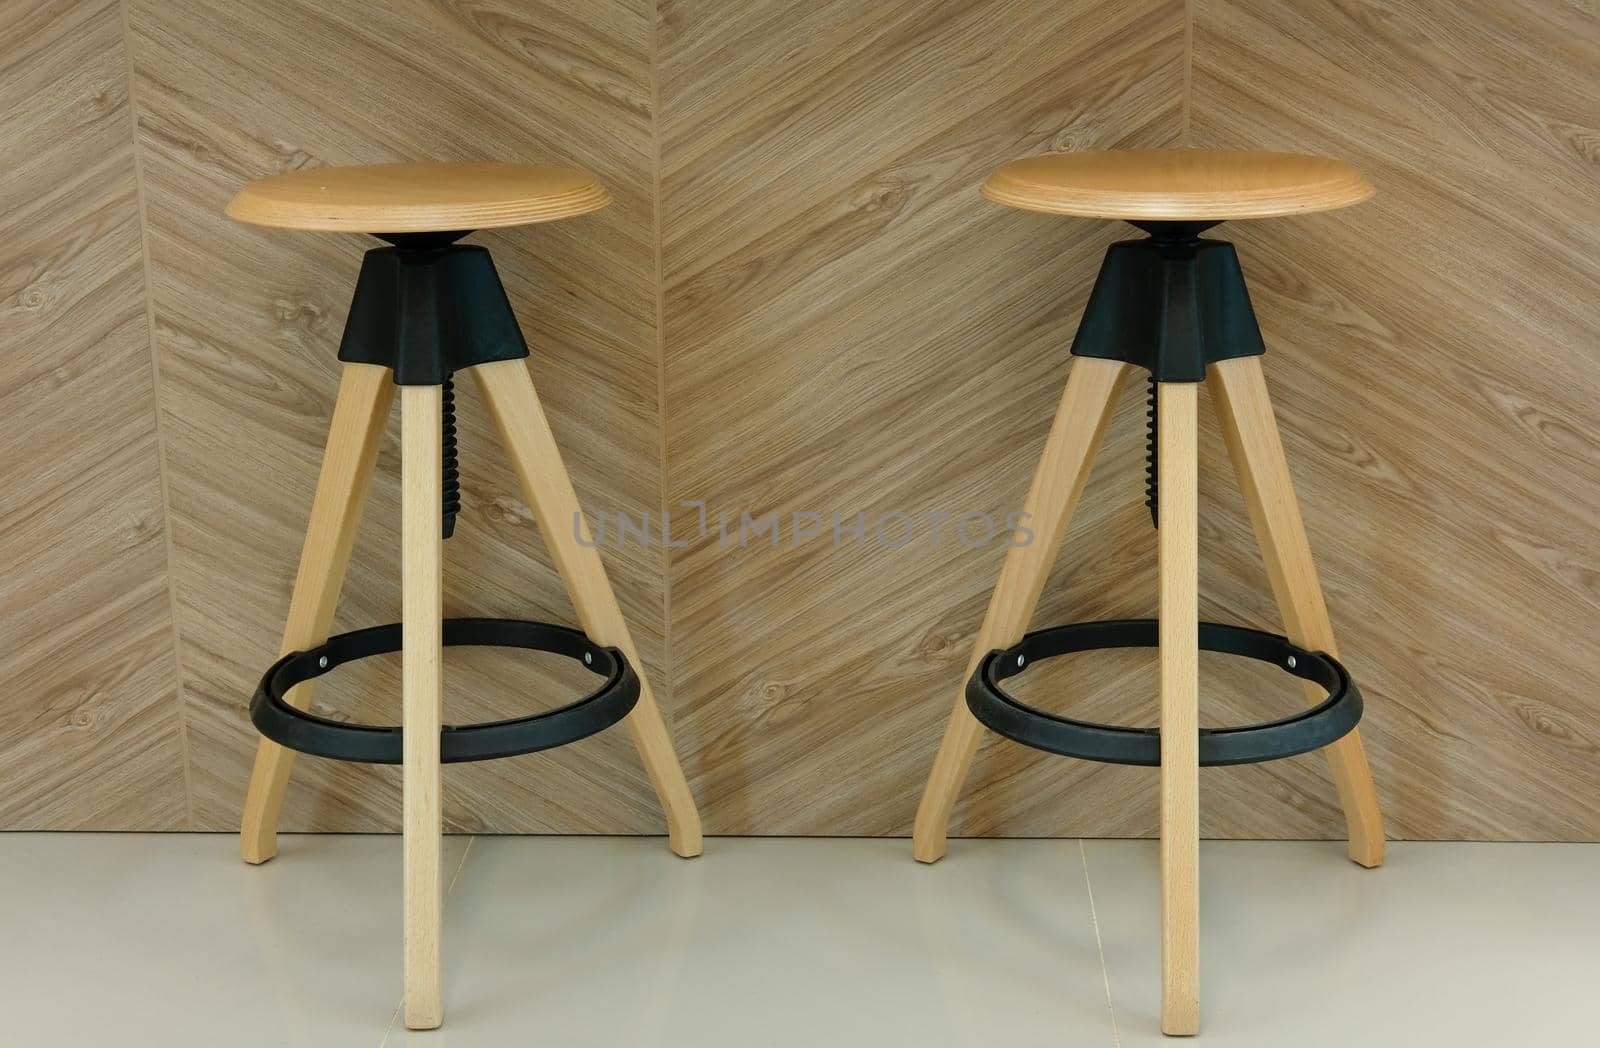 wood stool chair in cafe coffee shop cafeteria restaurant food center interior